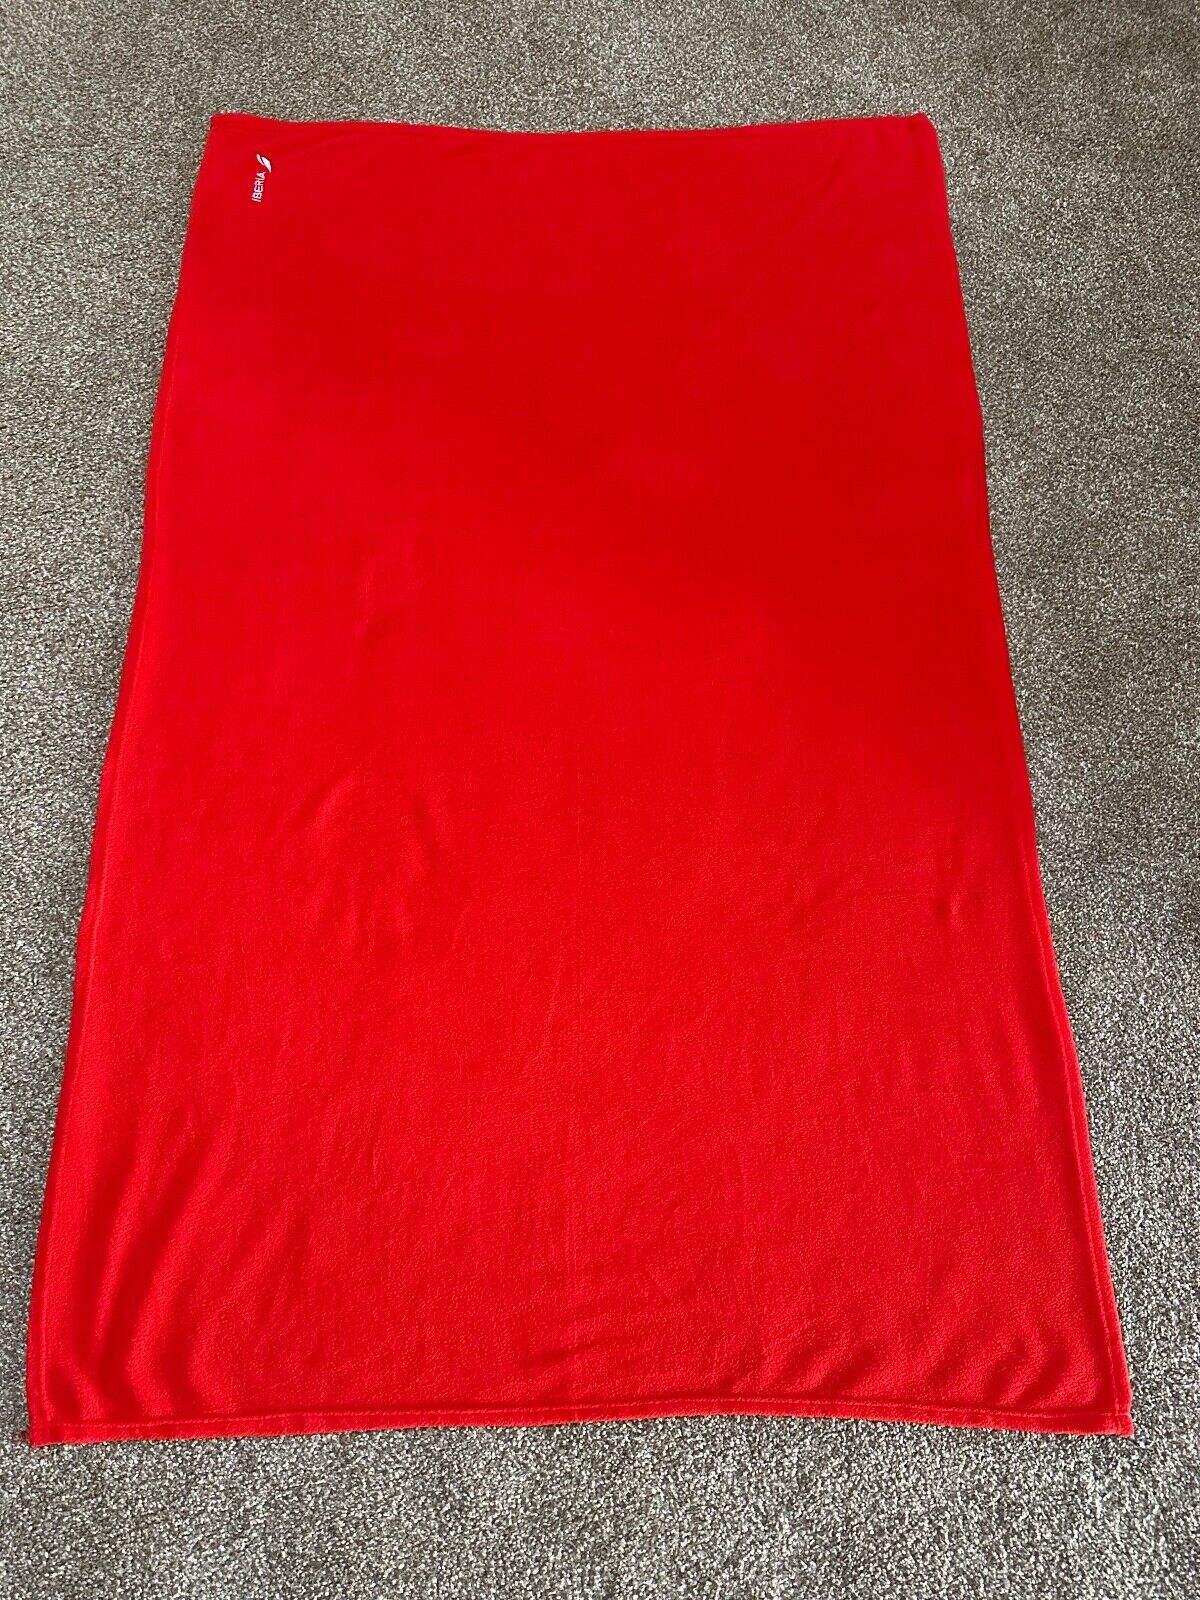 IBERIA AIRLINES 65 x 40 in. Red Don Chinflon, S.L. Embroidered Cabin Blanket